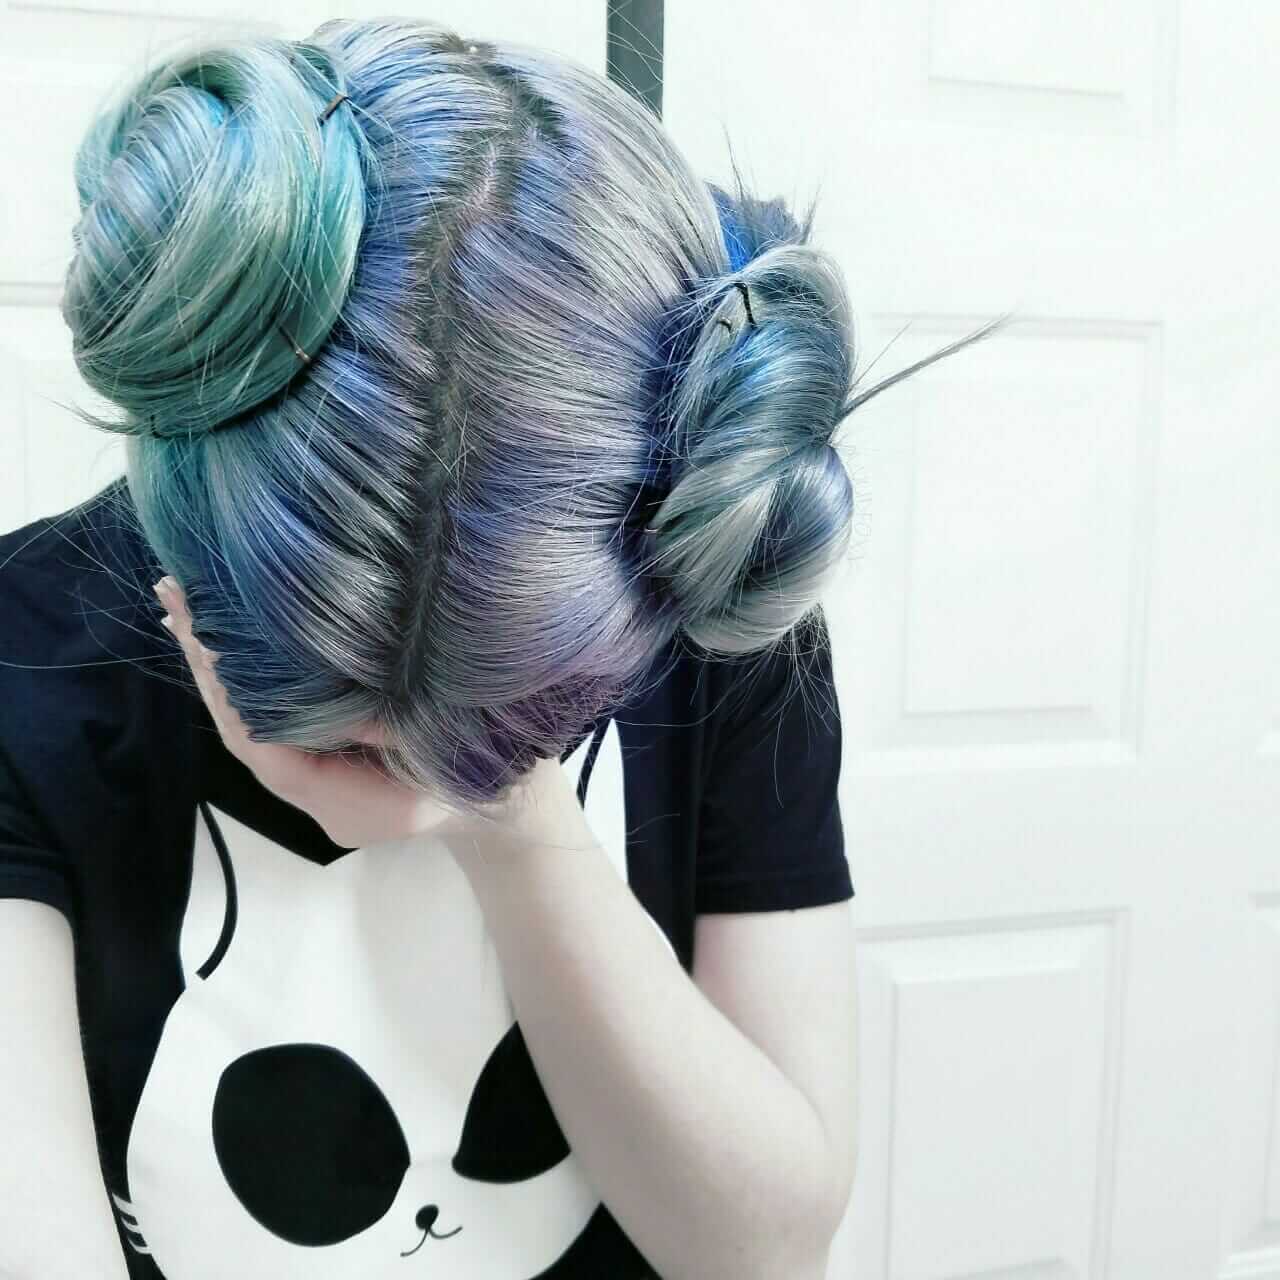 Grunge dyed turquoise and blue hair with buns